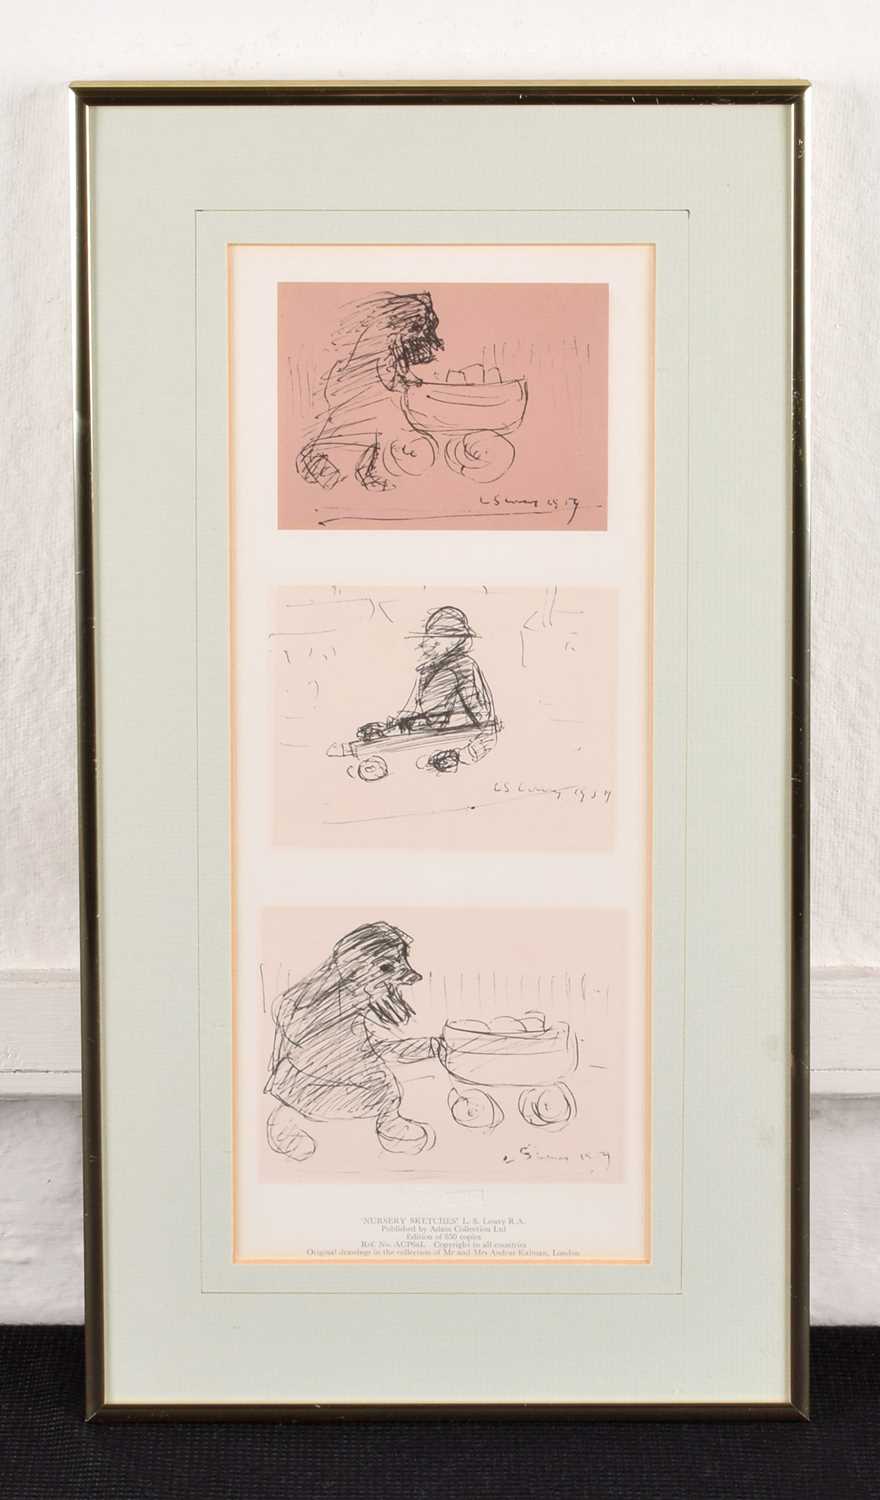 L.S. Lowry R.A. (British 1887-1976) "Nursery Sketches" - Image 2 of 2